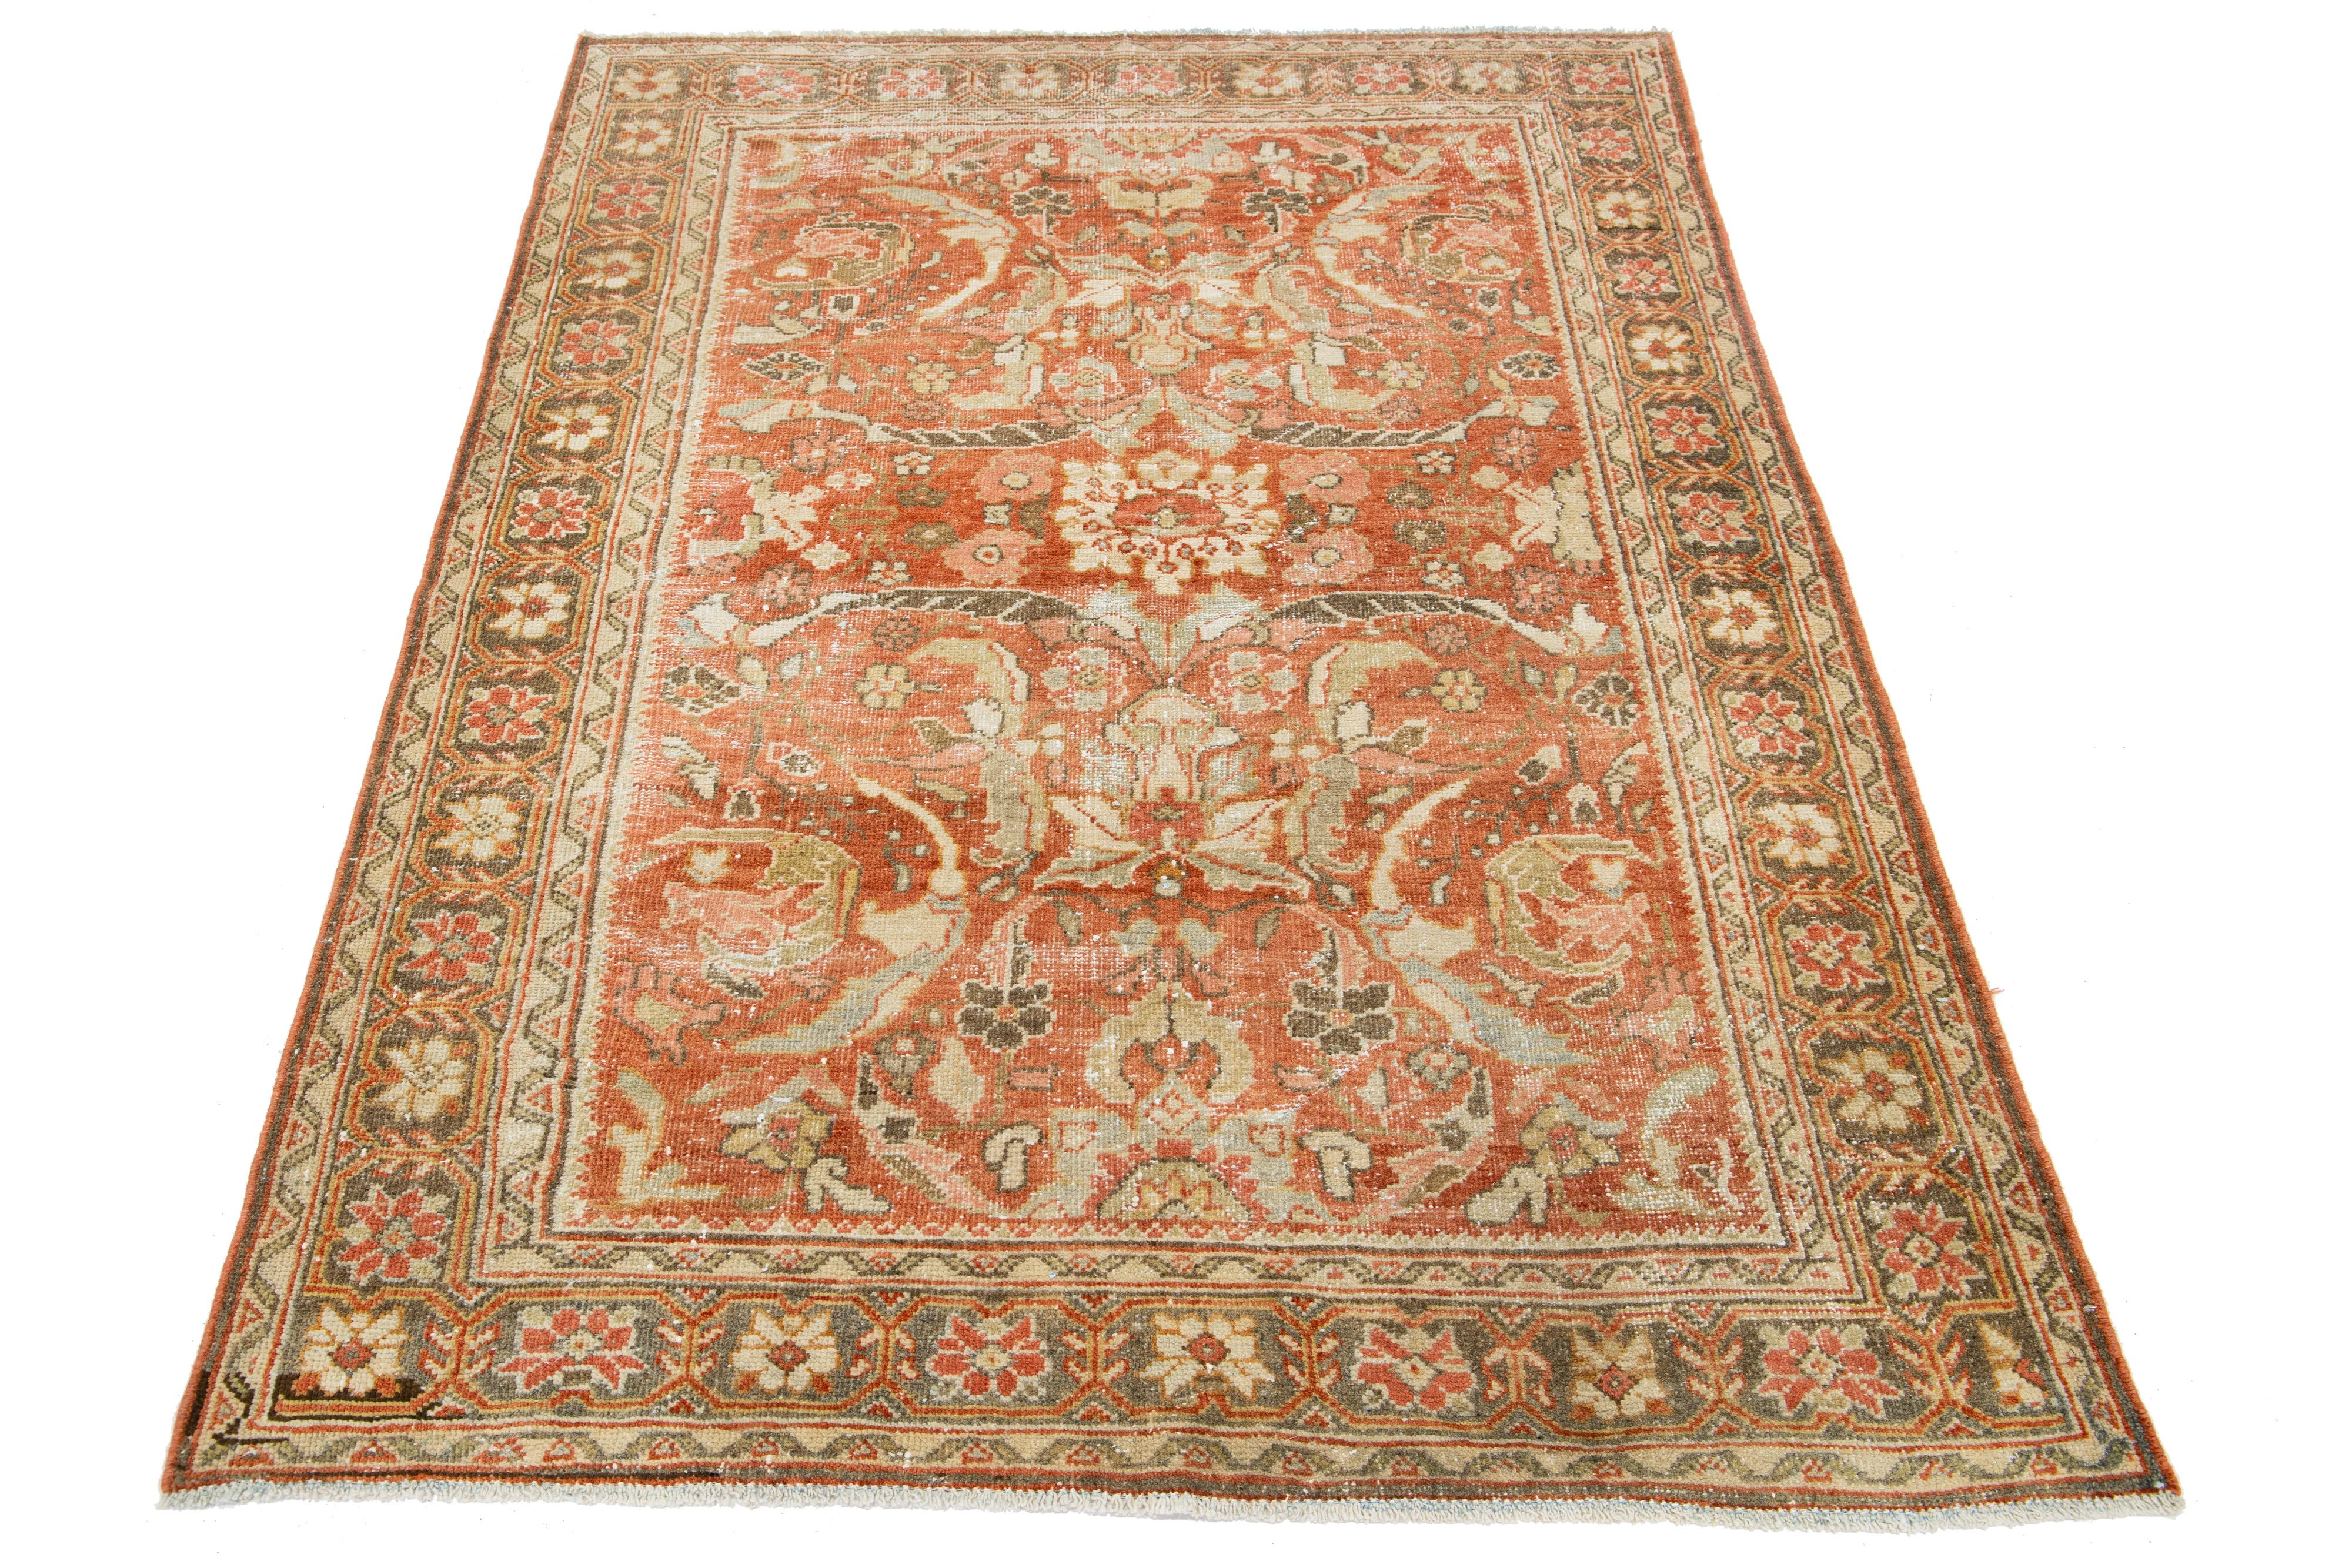 Beautiful Vintage Mahal hand-knotted wool rug with a rust color field. This Persian rug has beige, gray, pink, and brown hues throughout the floral motif.

This rug measures 5'1